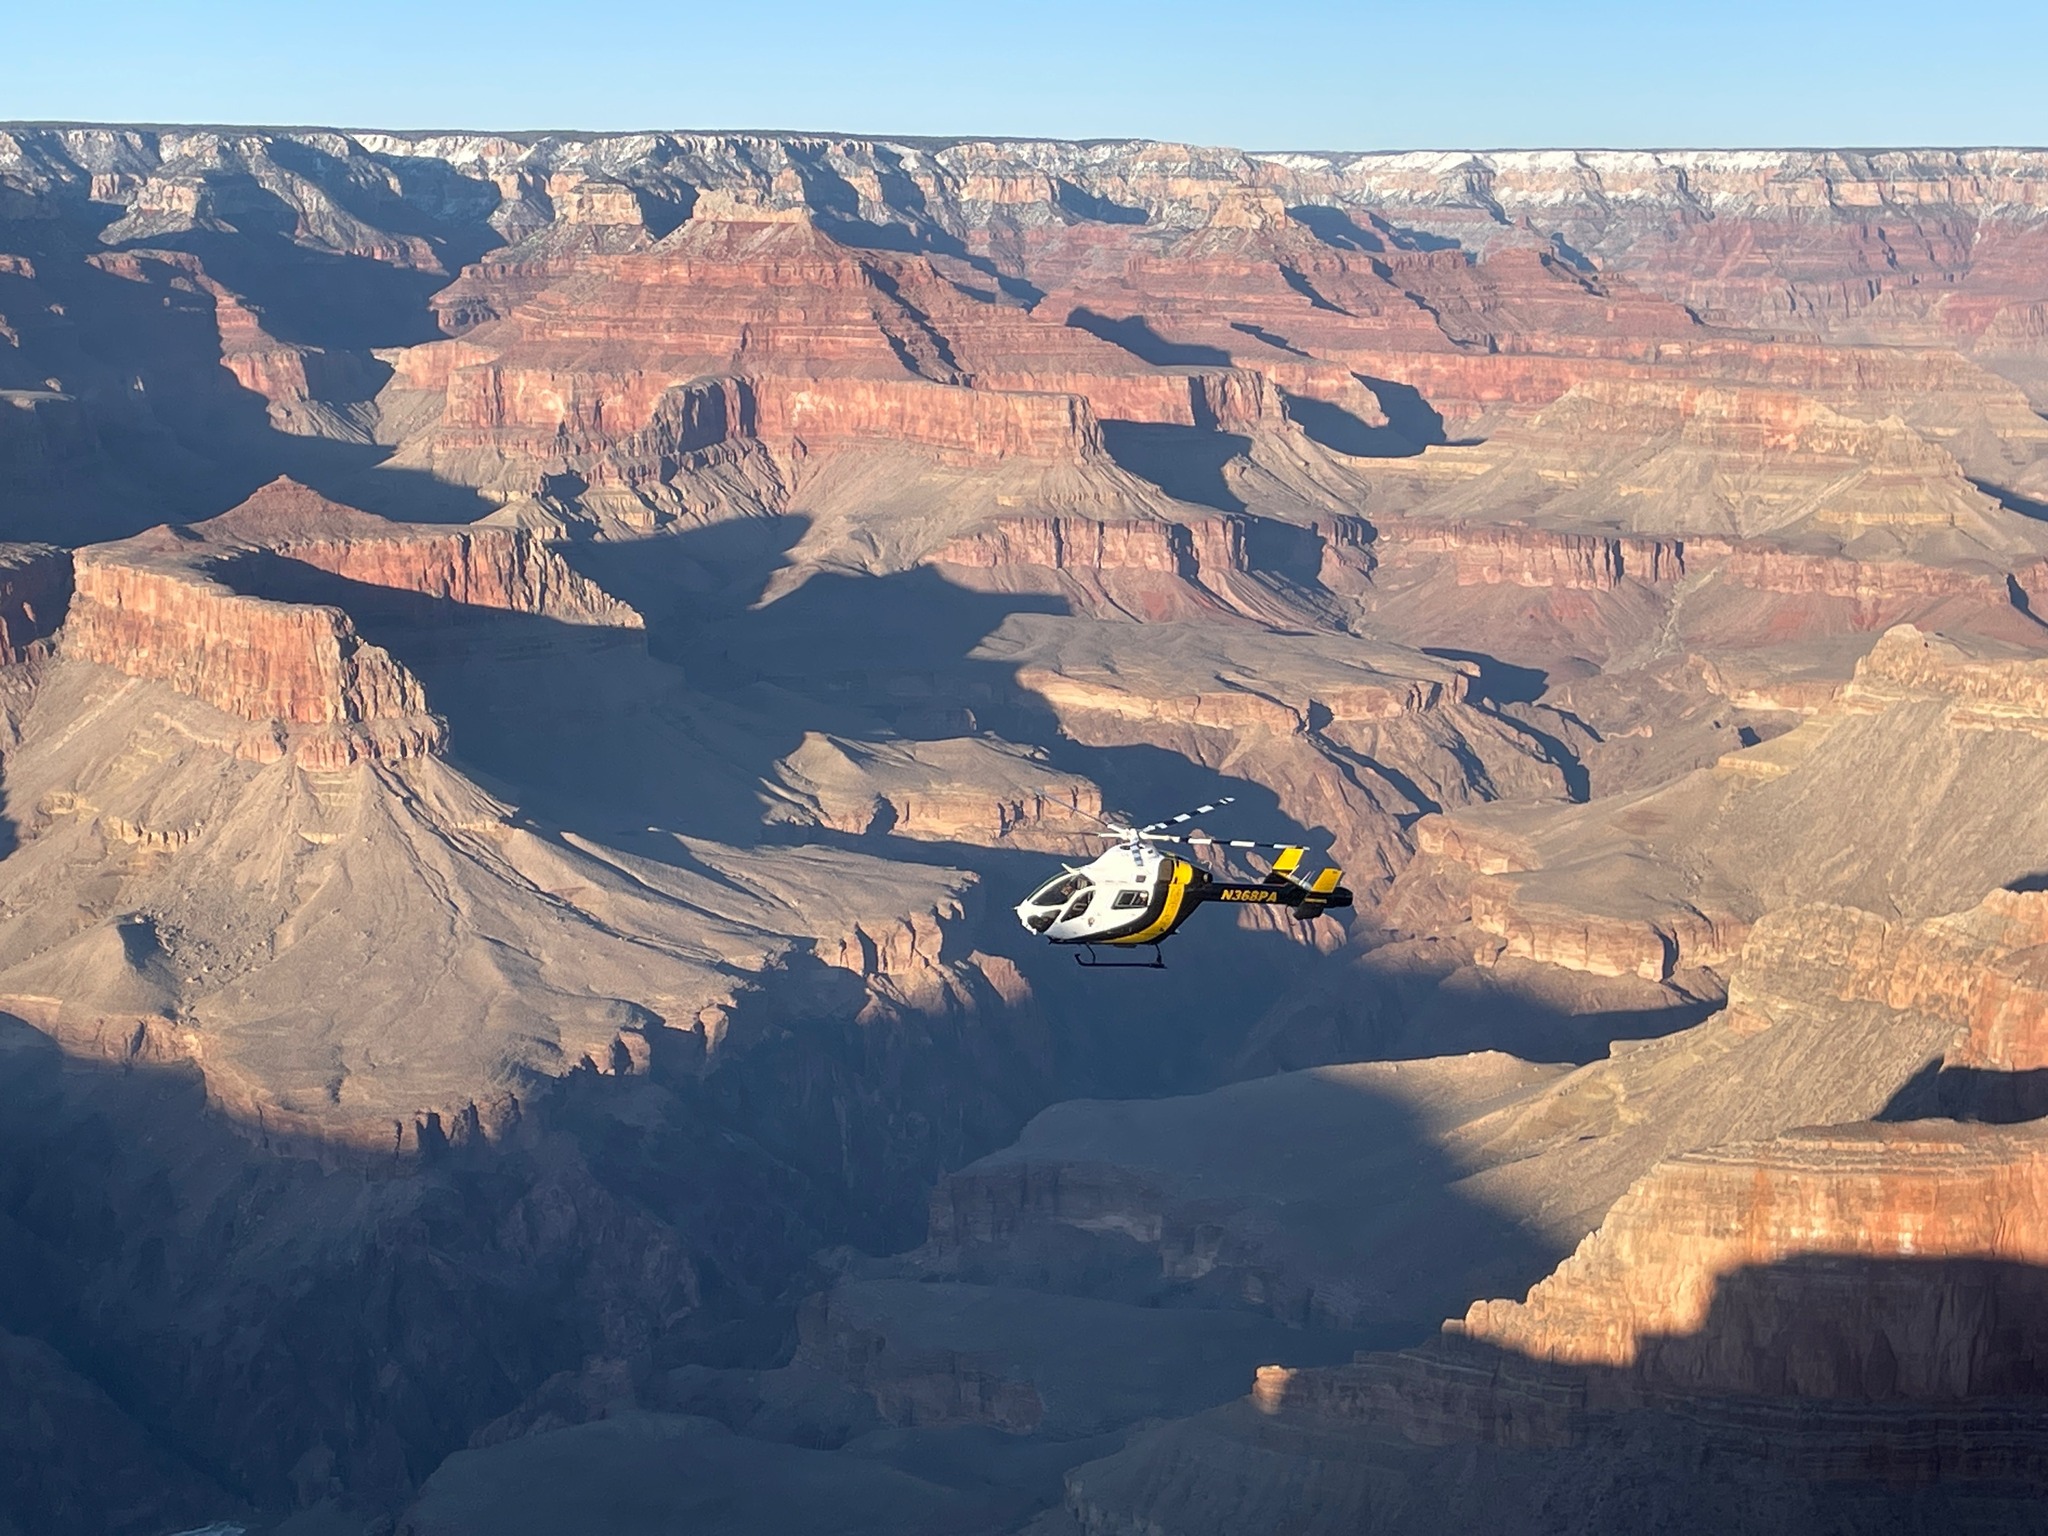 A helicopter hovers over the Grand Canyon